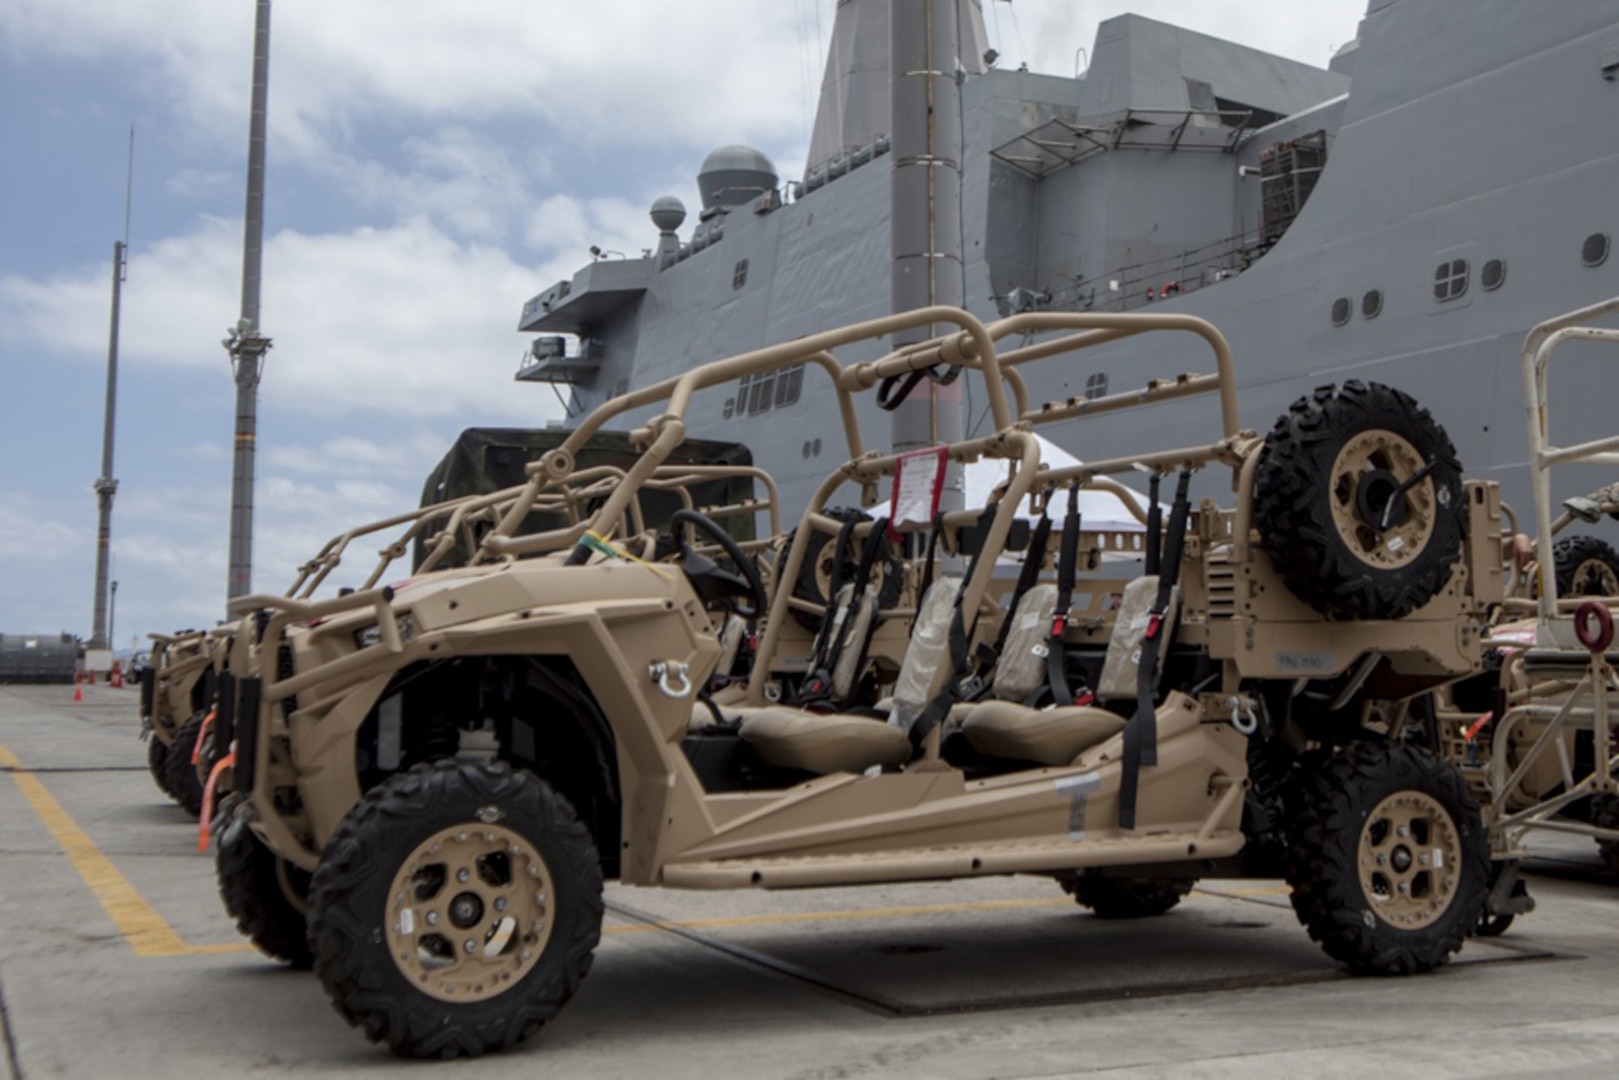 An MRZR Tactical Warfighting all-terrain vehicle belonging to the 31st Marine Expeditionary Unit sits pier side at White Beach Naval Facility, Okinawa, Japan, June 7, 2017. The 31st MEU partners with the Navy’s Amphibious Squadron 11 to form the Bonhomme Richard Expeditionary Strike Group – a cohesive blue-green team capable of accomplishing a variety of missions across the Indo-Asia-Pacific. 